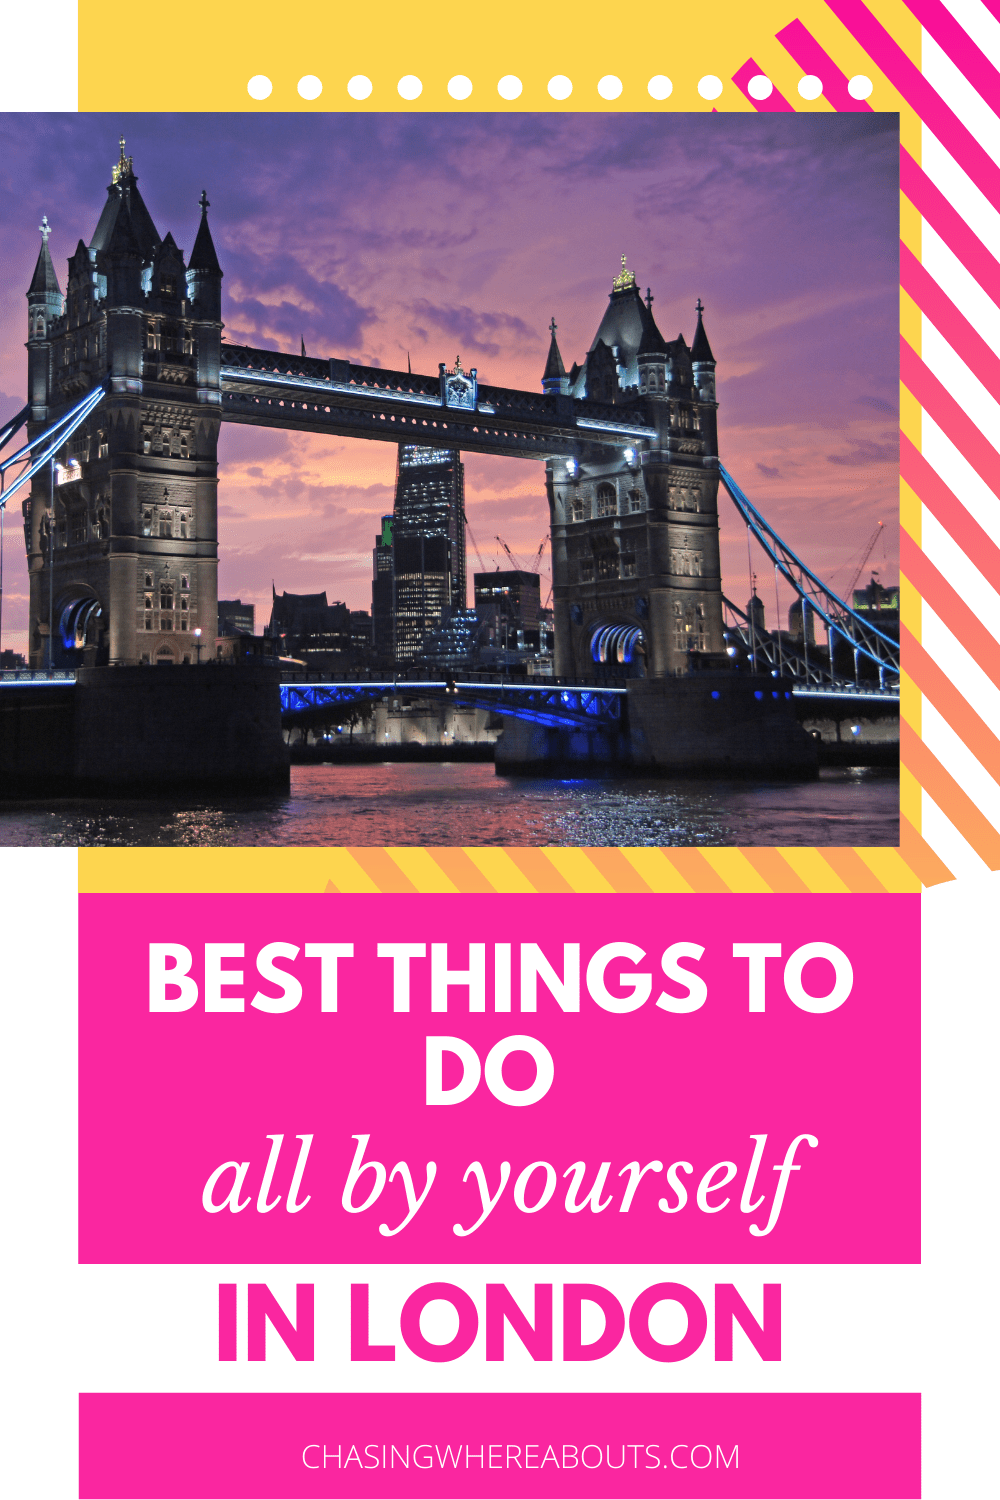 Things to do in London Alone